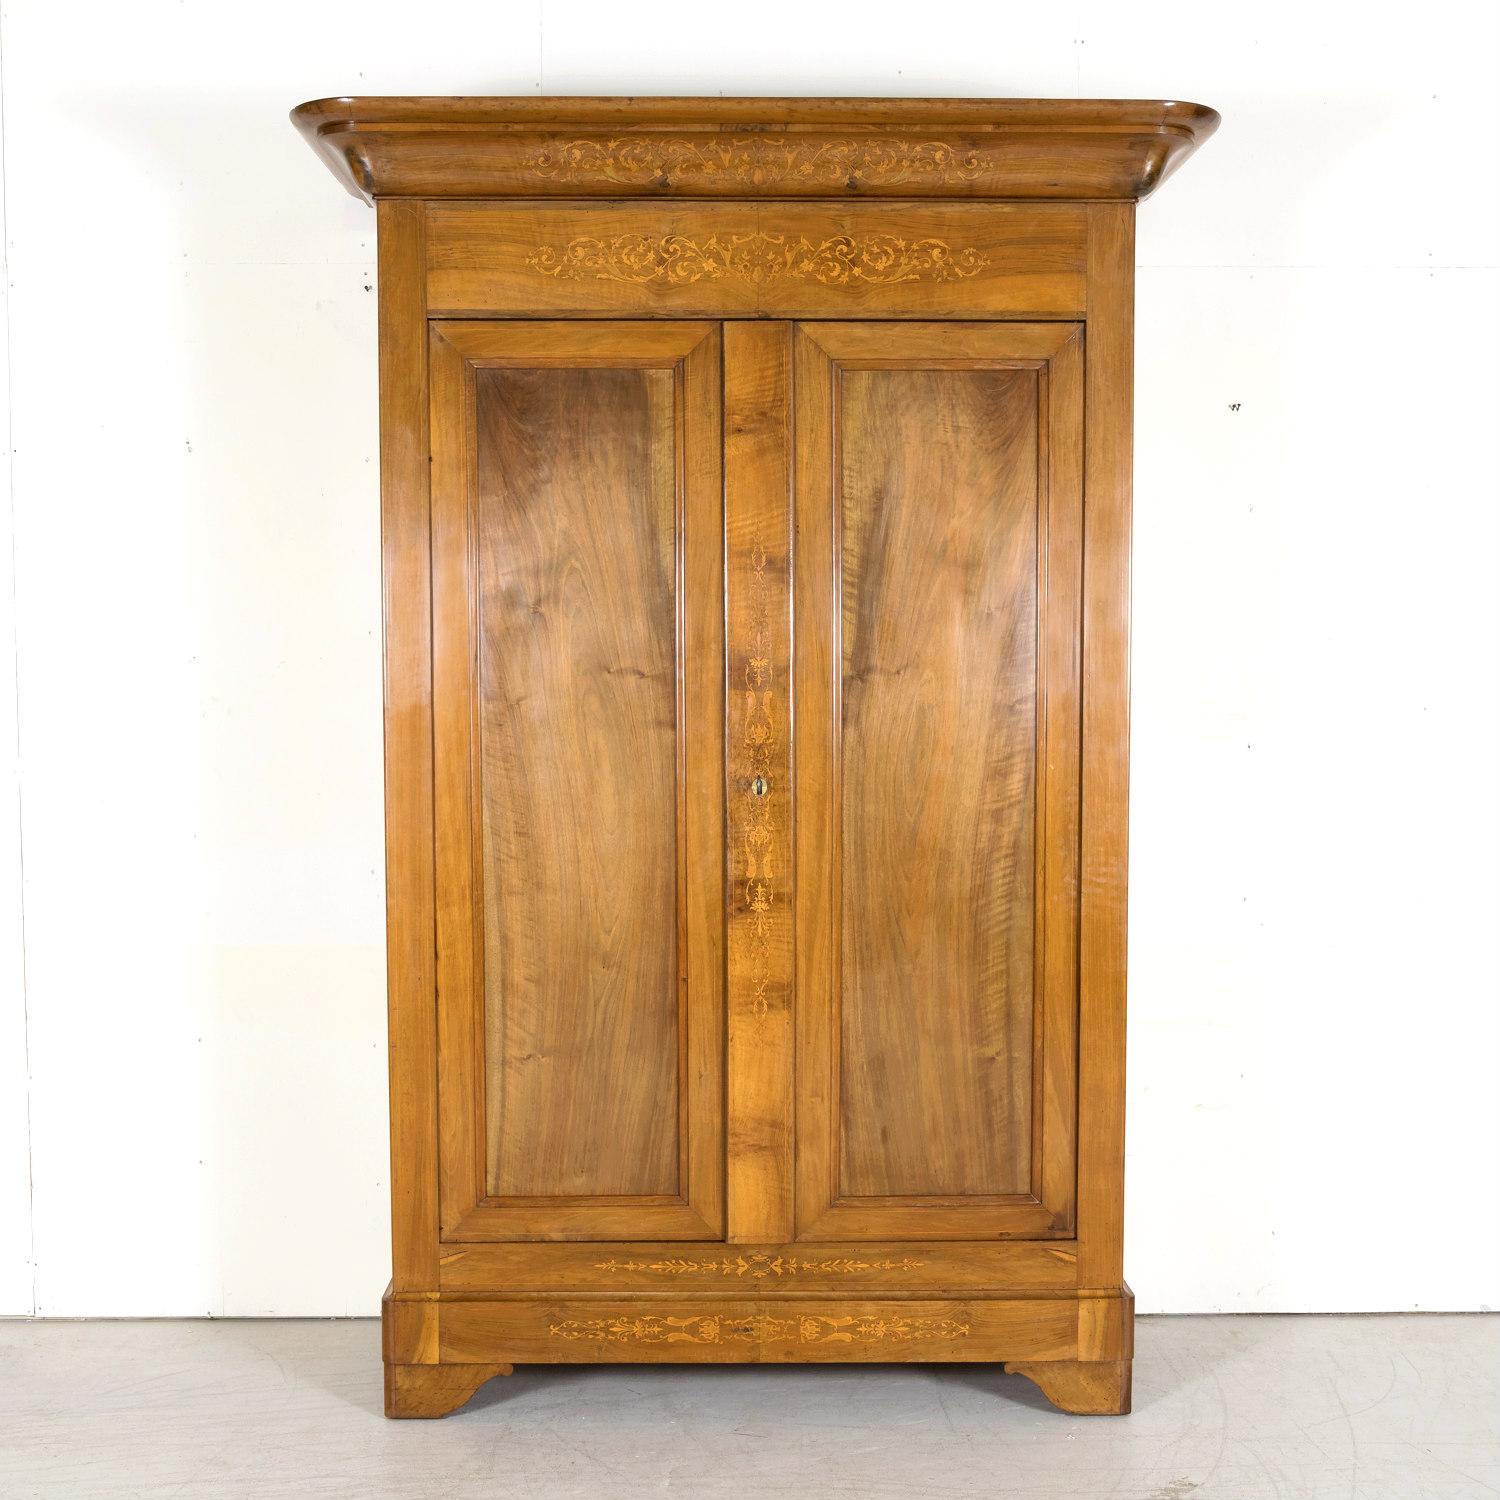 19th Century French Restauration Period Walnut Armoire with Fruitwood Marquetry In Good Condition For Sale In Birmingham, AL